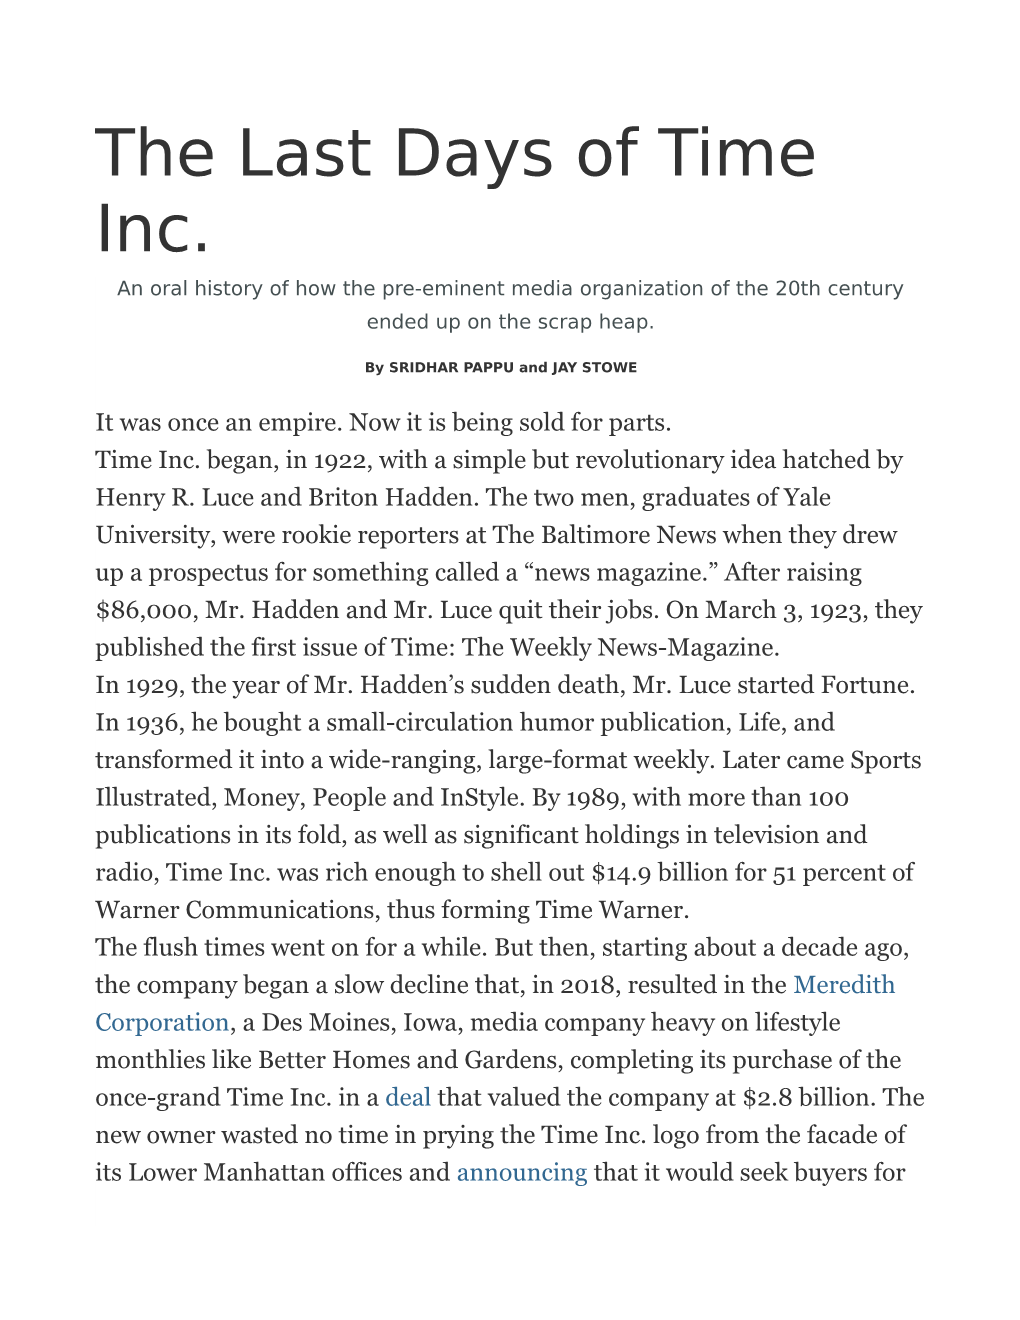 The Last Days of Time Inc. an Oral History of How the Pre-Eminent Media Organization of the 20Th Century Ended up on the Scrap Heap